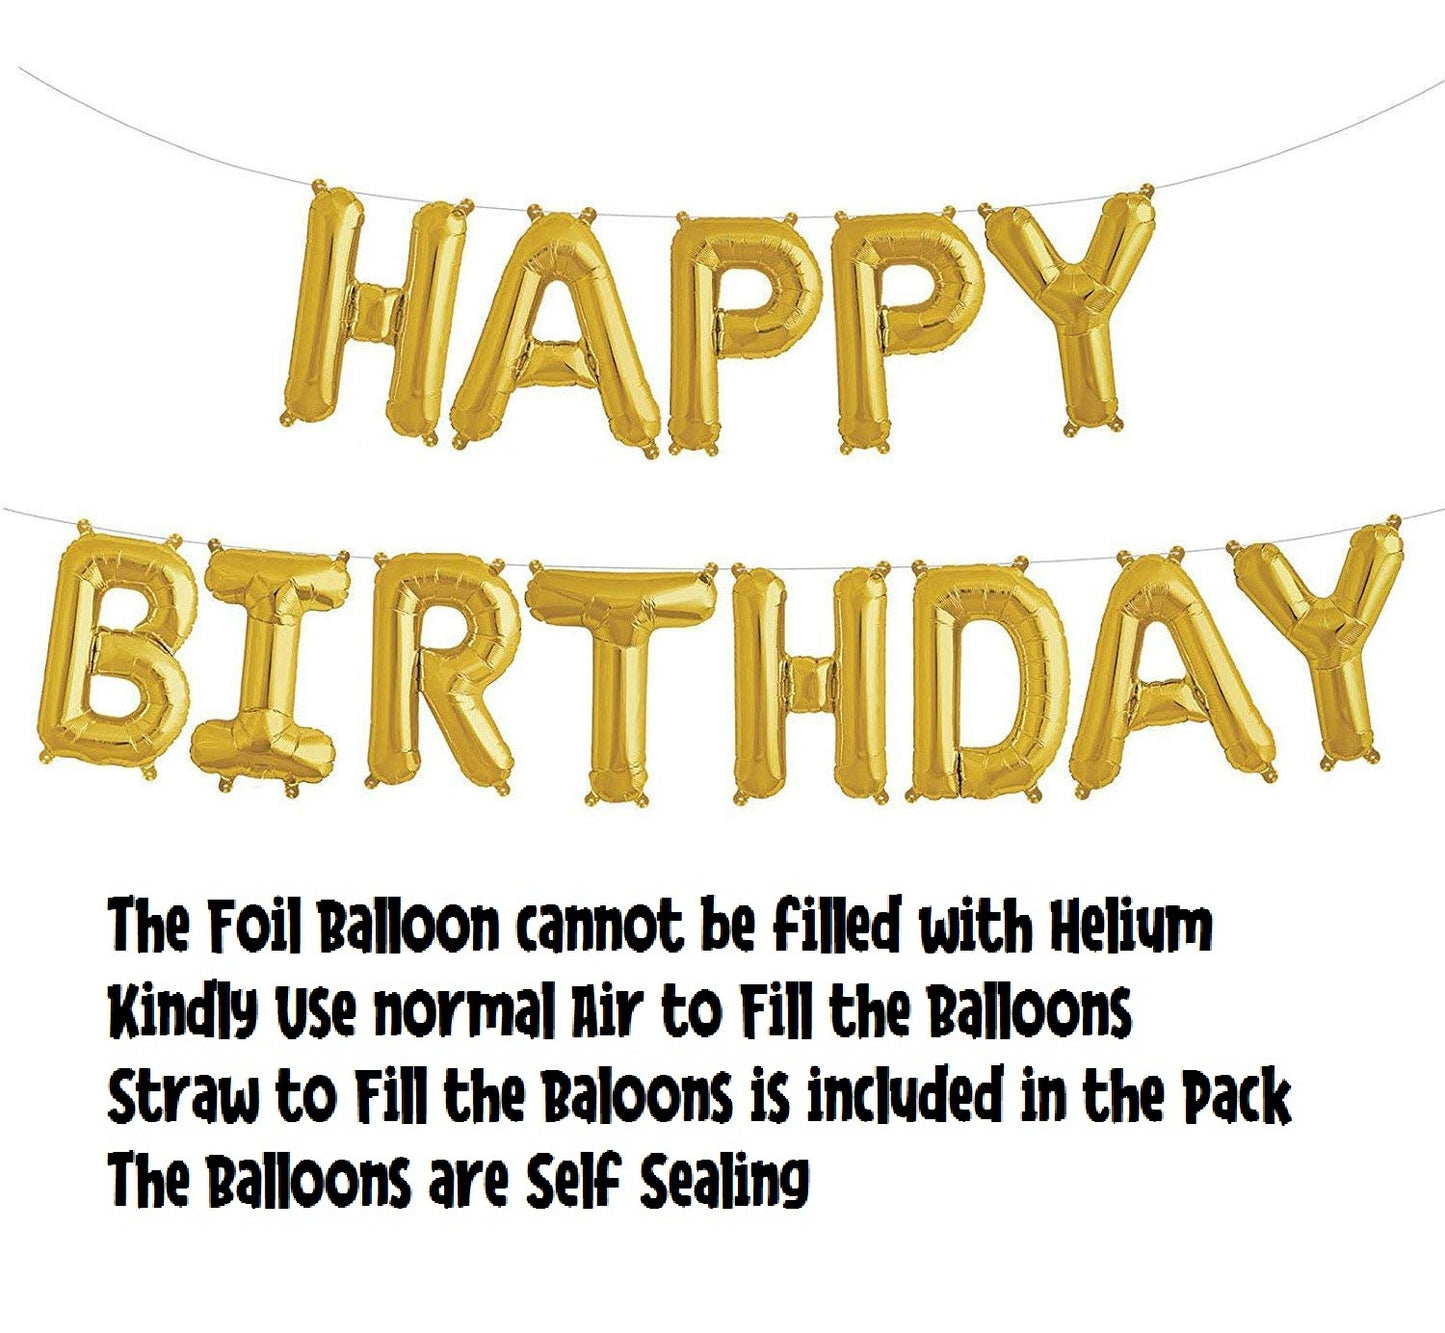 Happy 59th Birthday Foil Balloon Combo Party Decoration for Anniversary Celebration 16 Inches